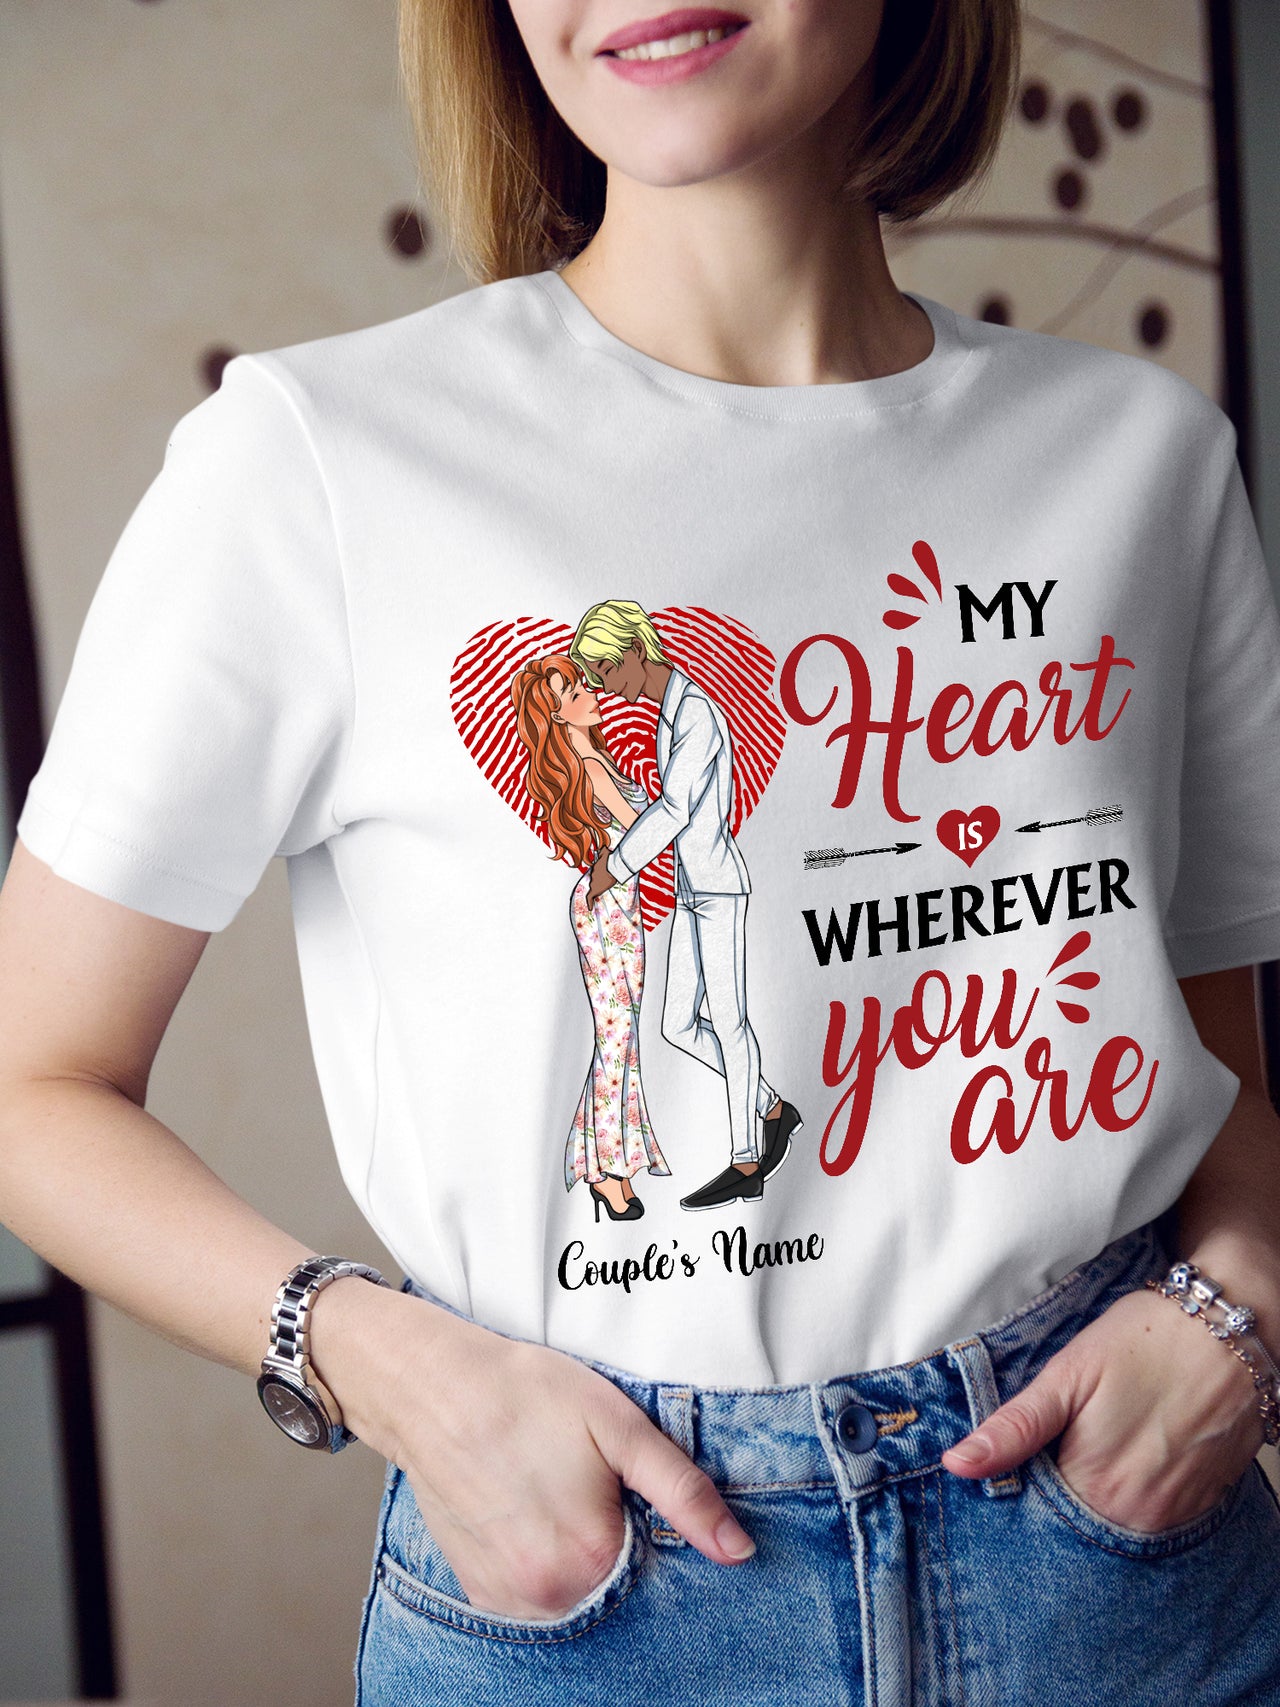 Personalized Custom Name My Heart Is Wherever You Are Shirt Gift For Man Woman Girl Boy